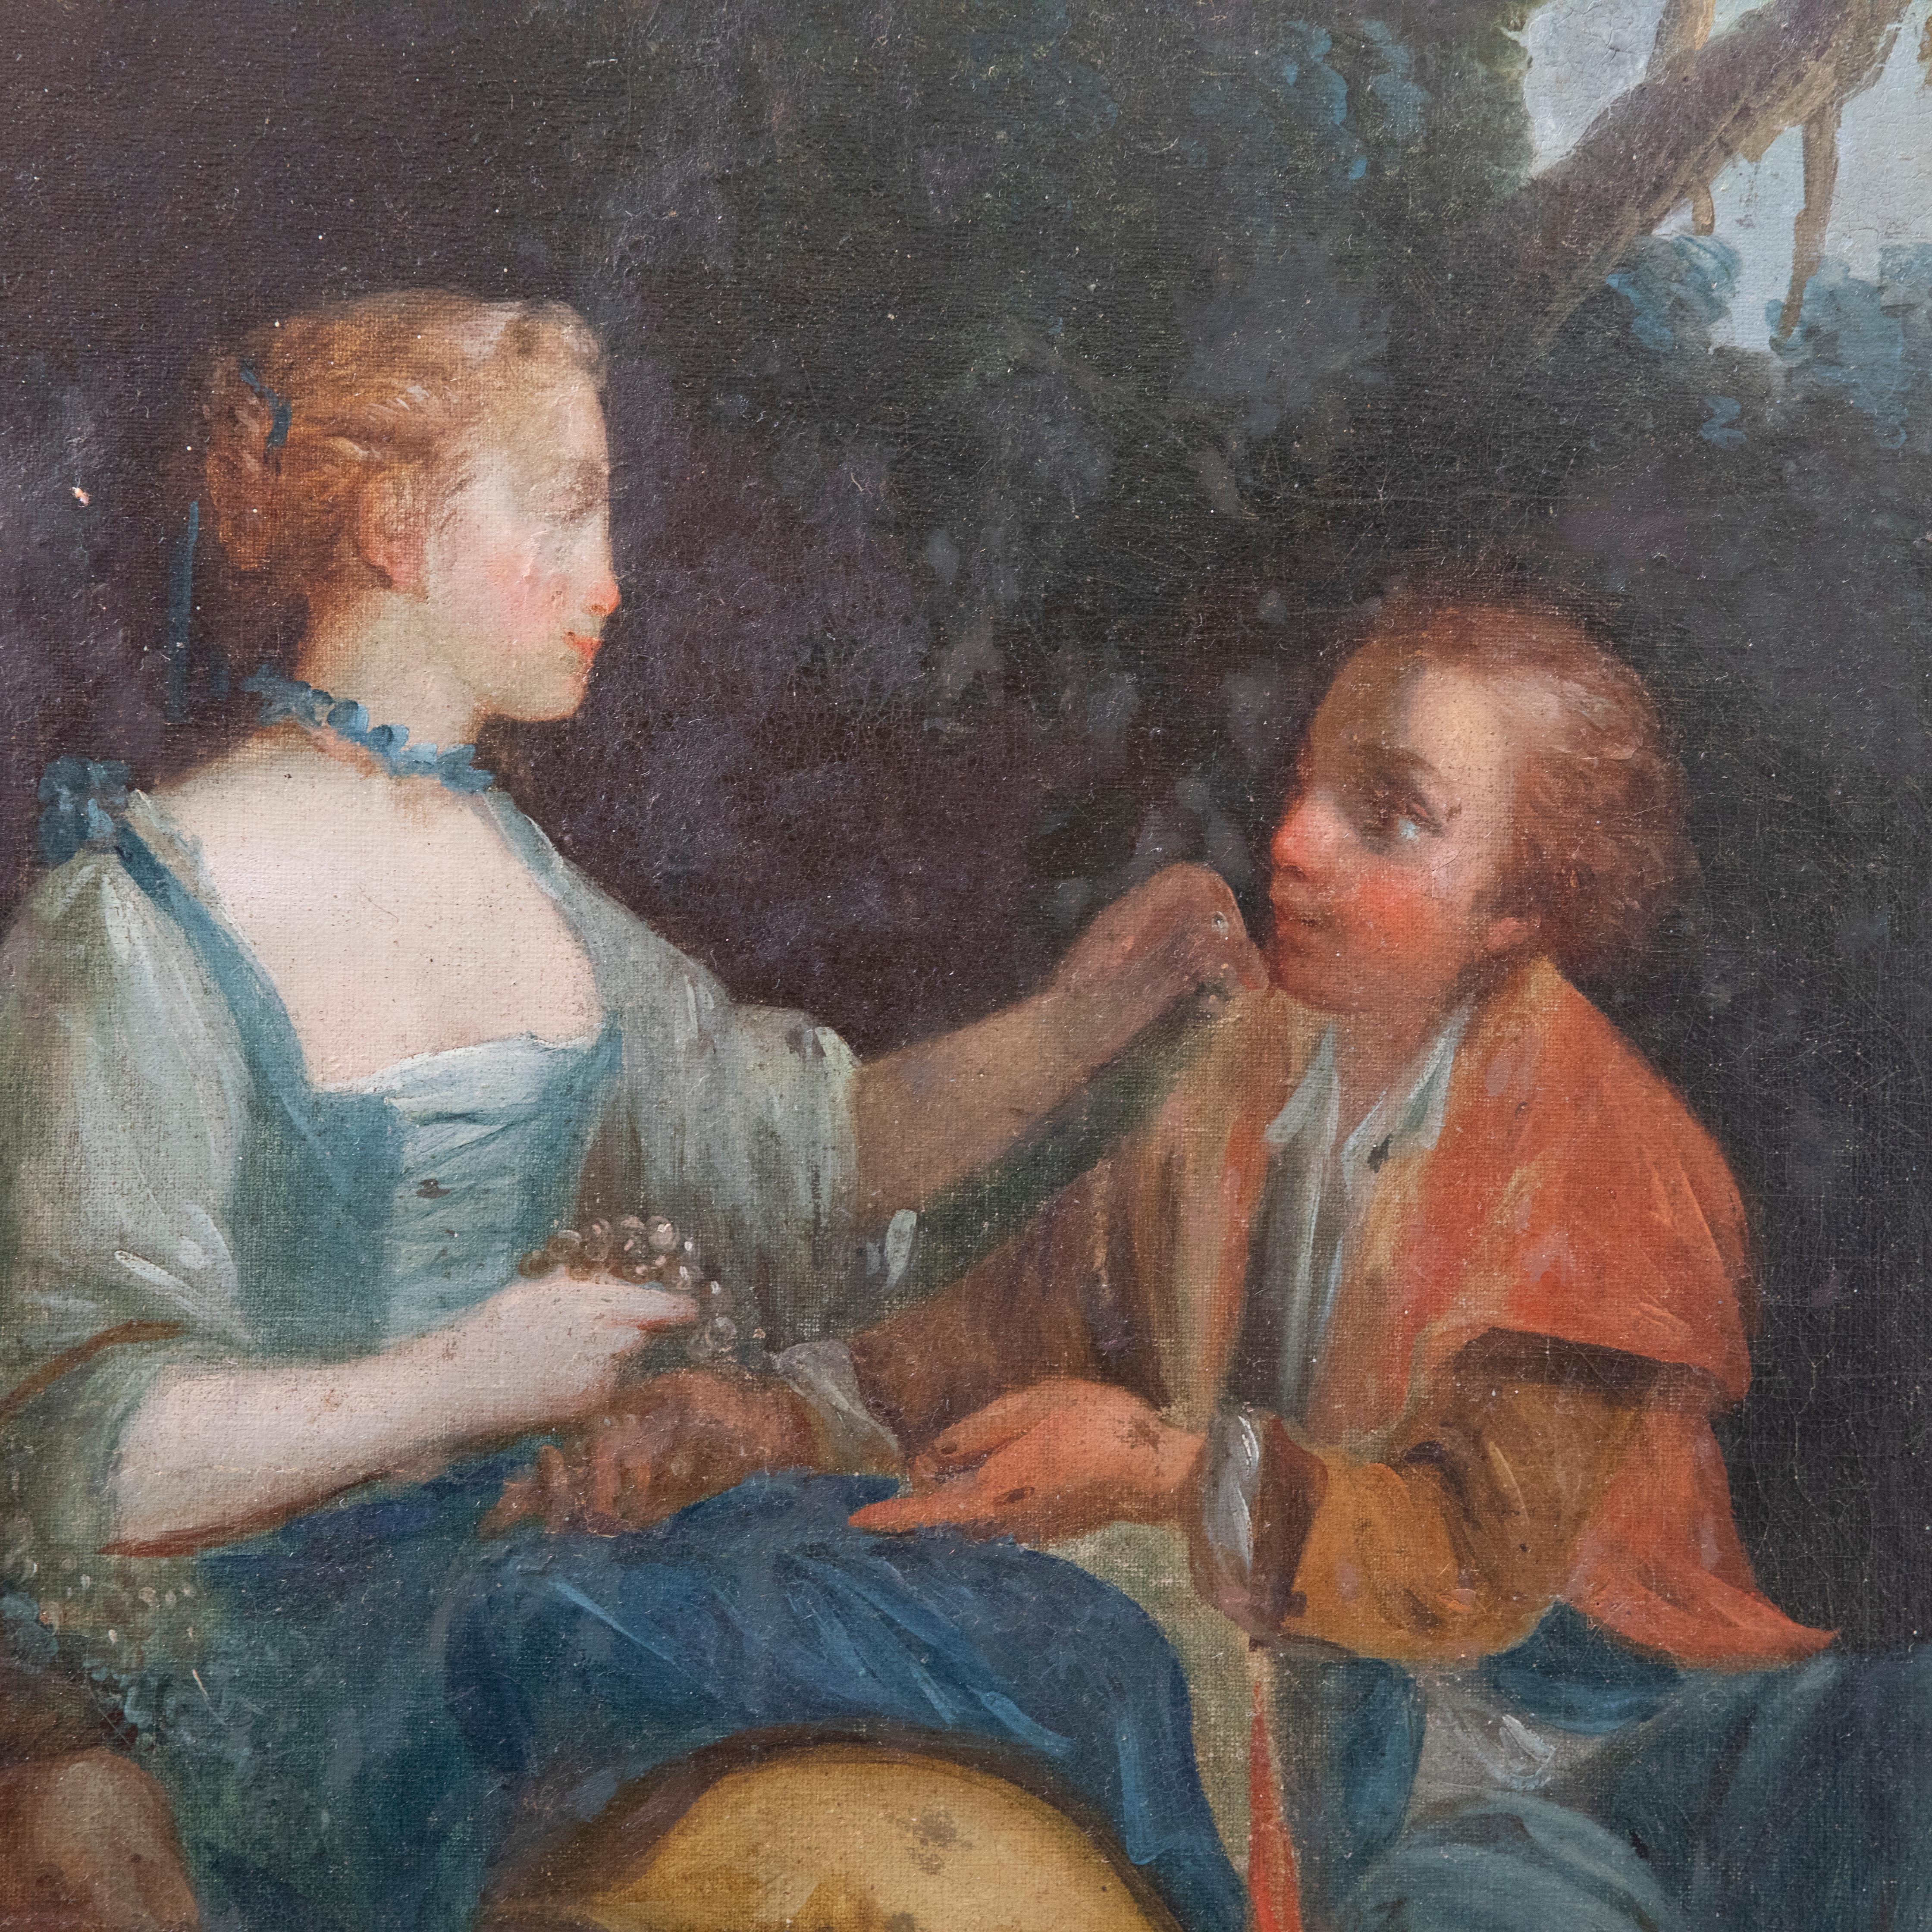 A romantic oil study depicting a couple resting on a woodland floor feeding each other fruit. The scene appears to be a play on the Four Seasons series by FranÃ§ois Boucher where the artist follows a couple in a romantic style throughout the seasons